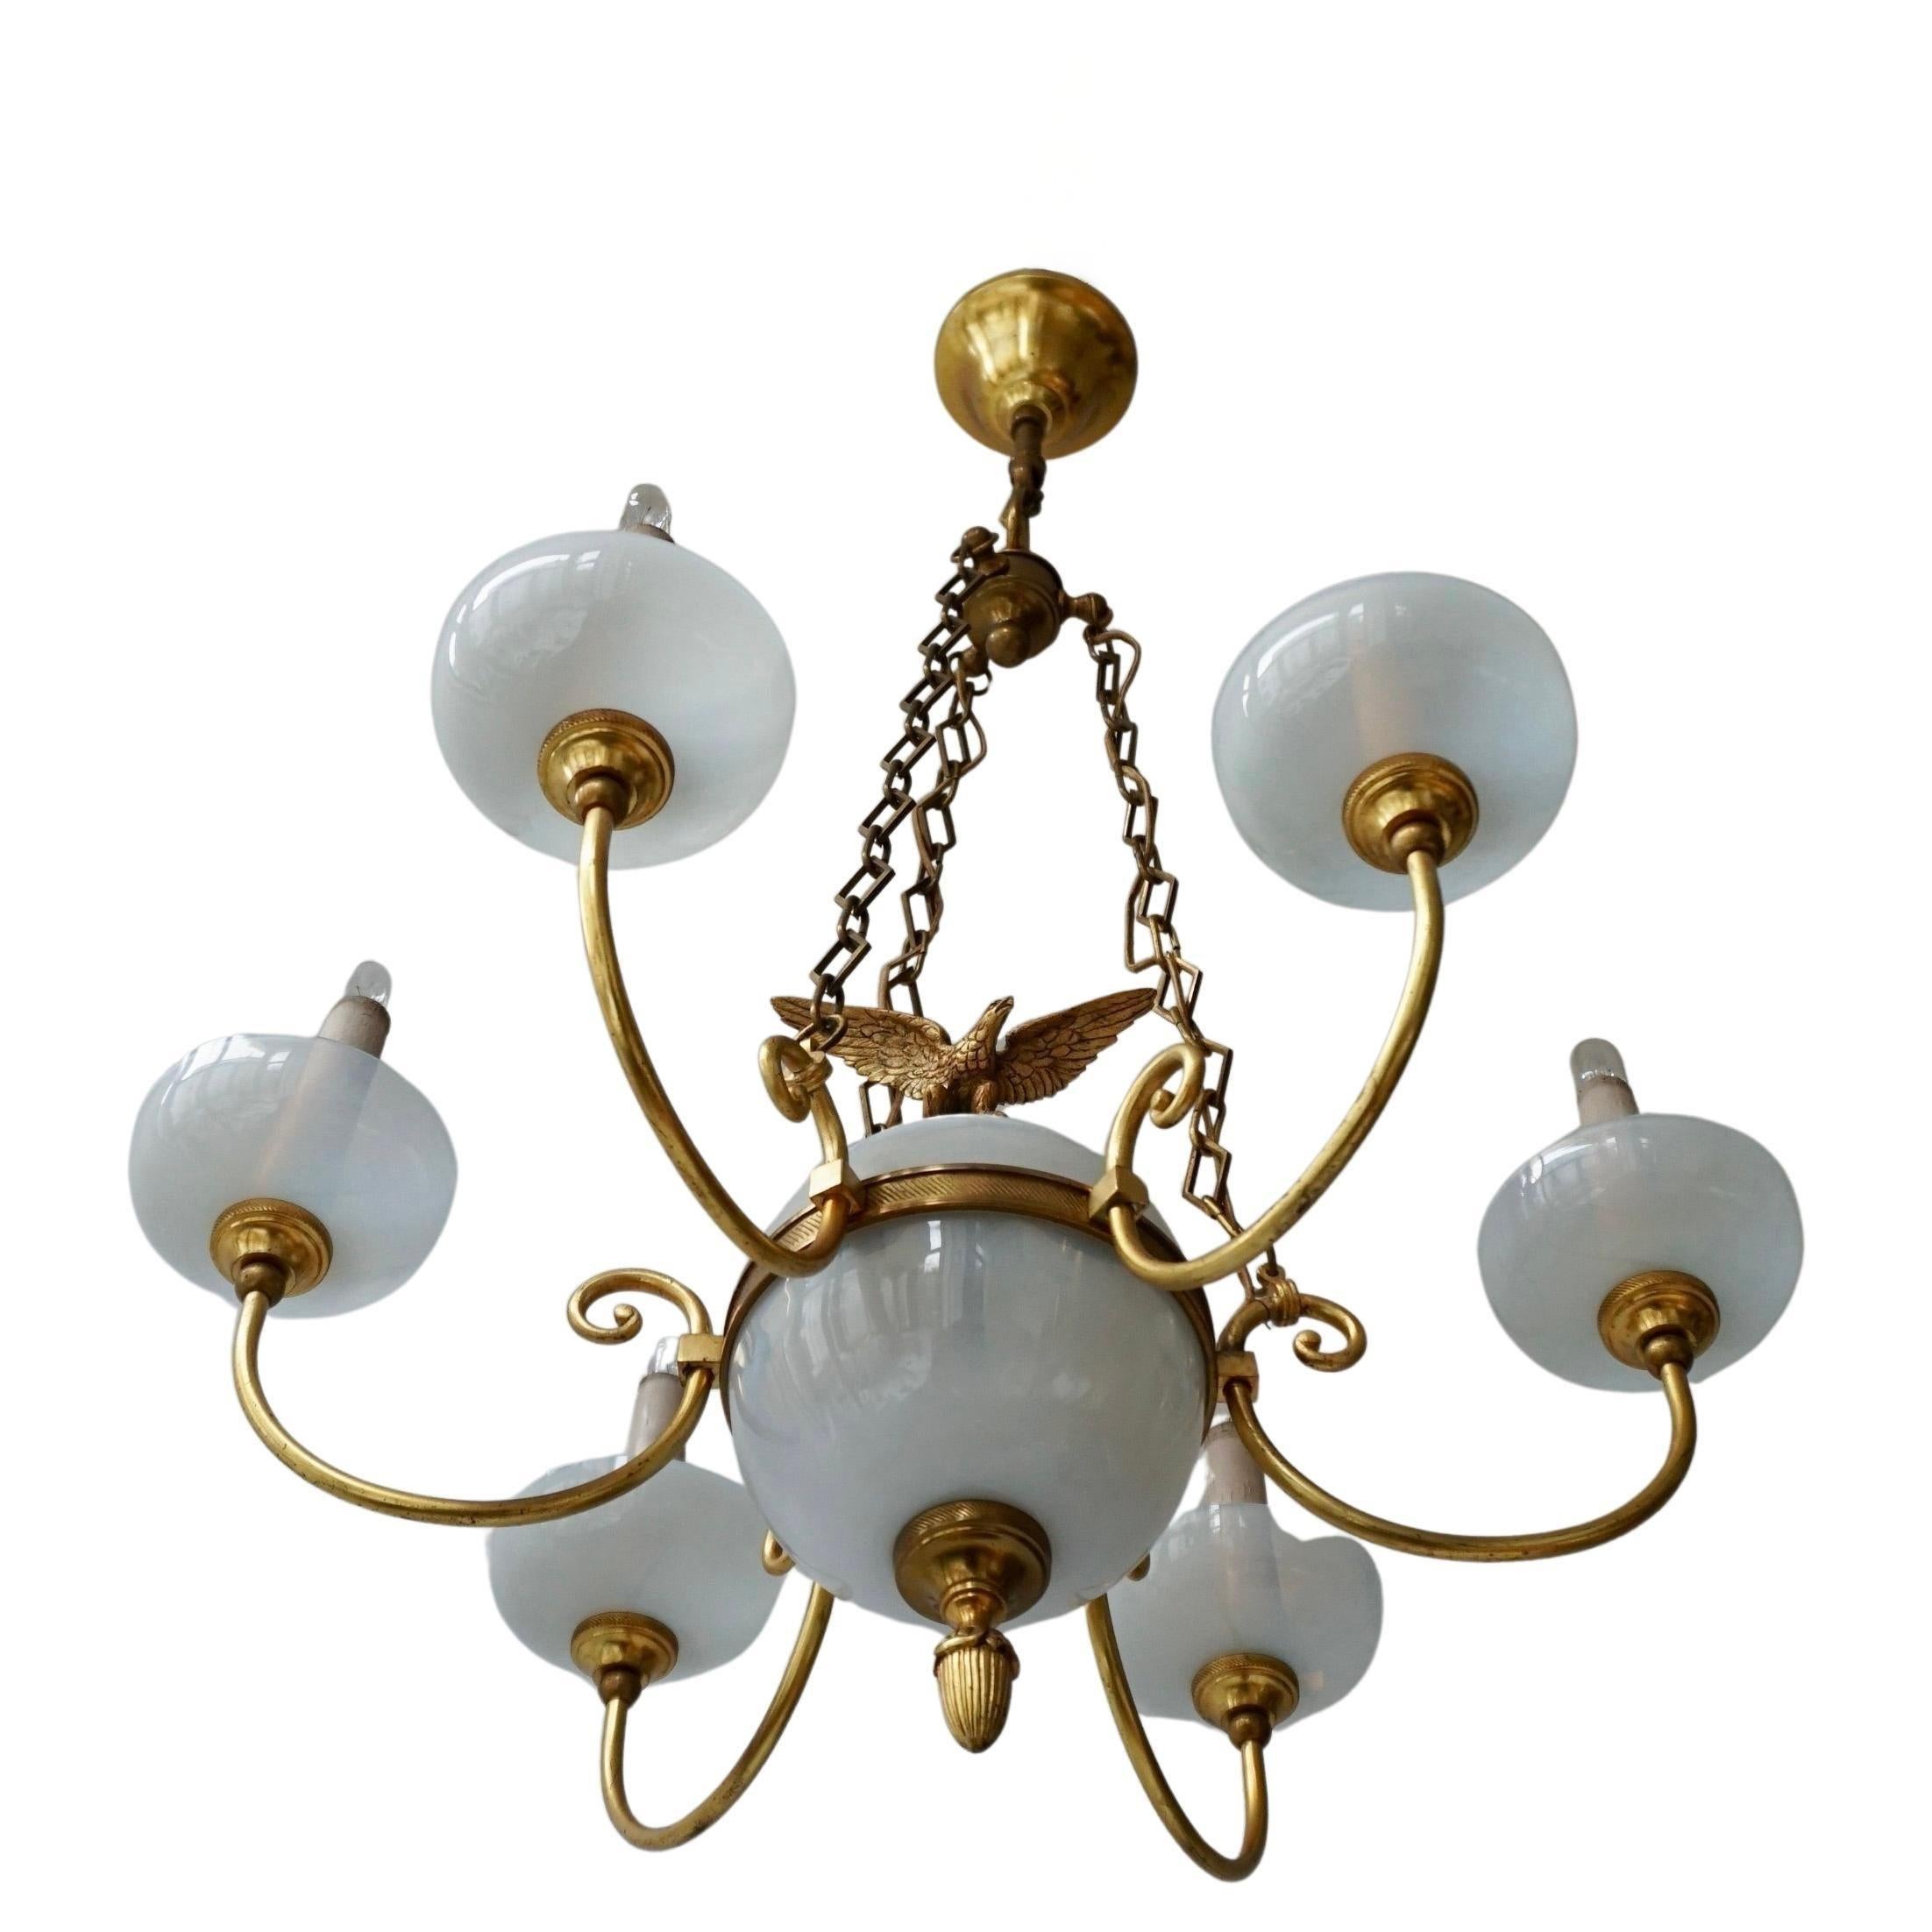 A small chandelier made of brass and opal glass. With six light arms and a central sphere decorated with an eagle.

The chandelier has six sockets for small incandescent lamps with screw base or E14 type LEDs. It is possible to install this fixture